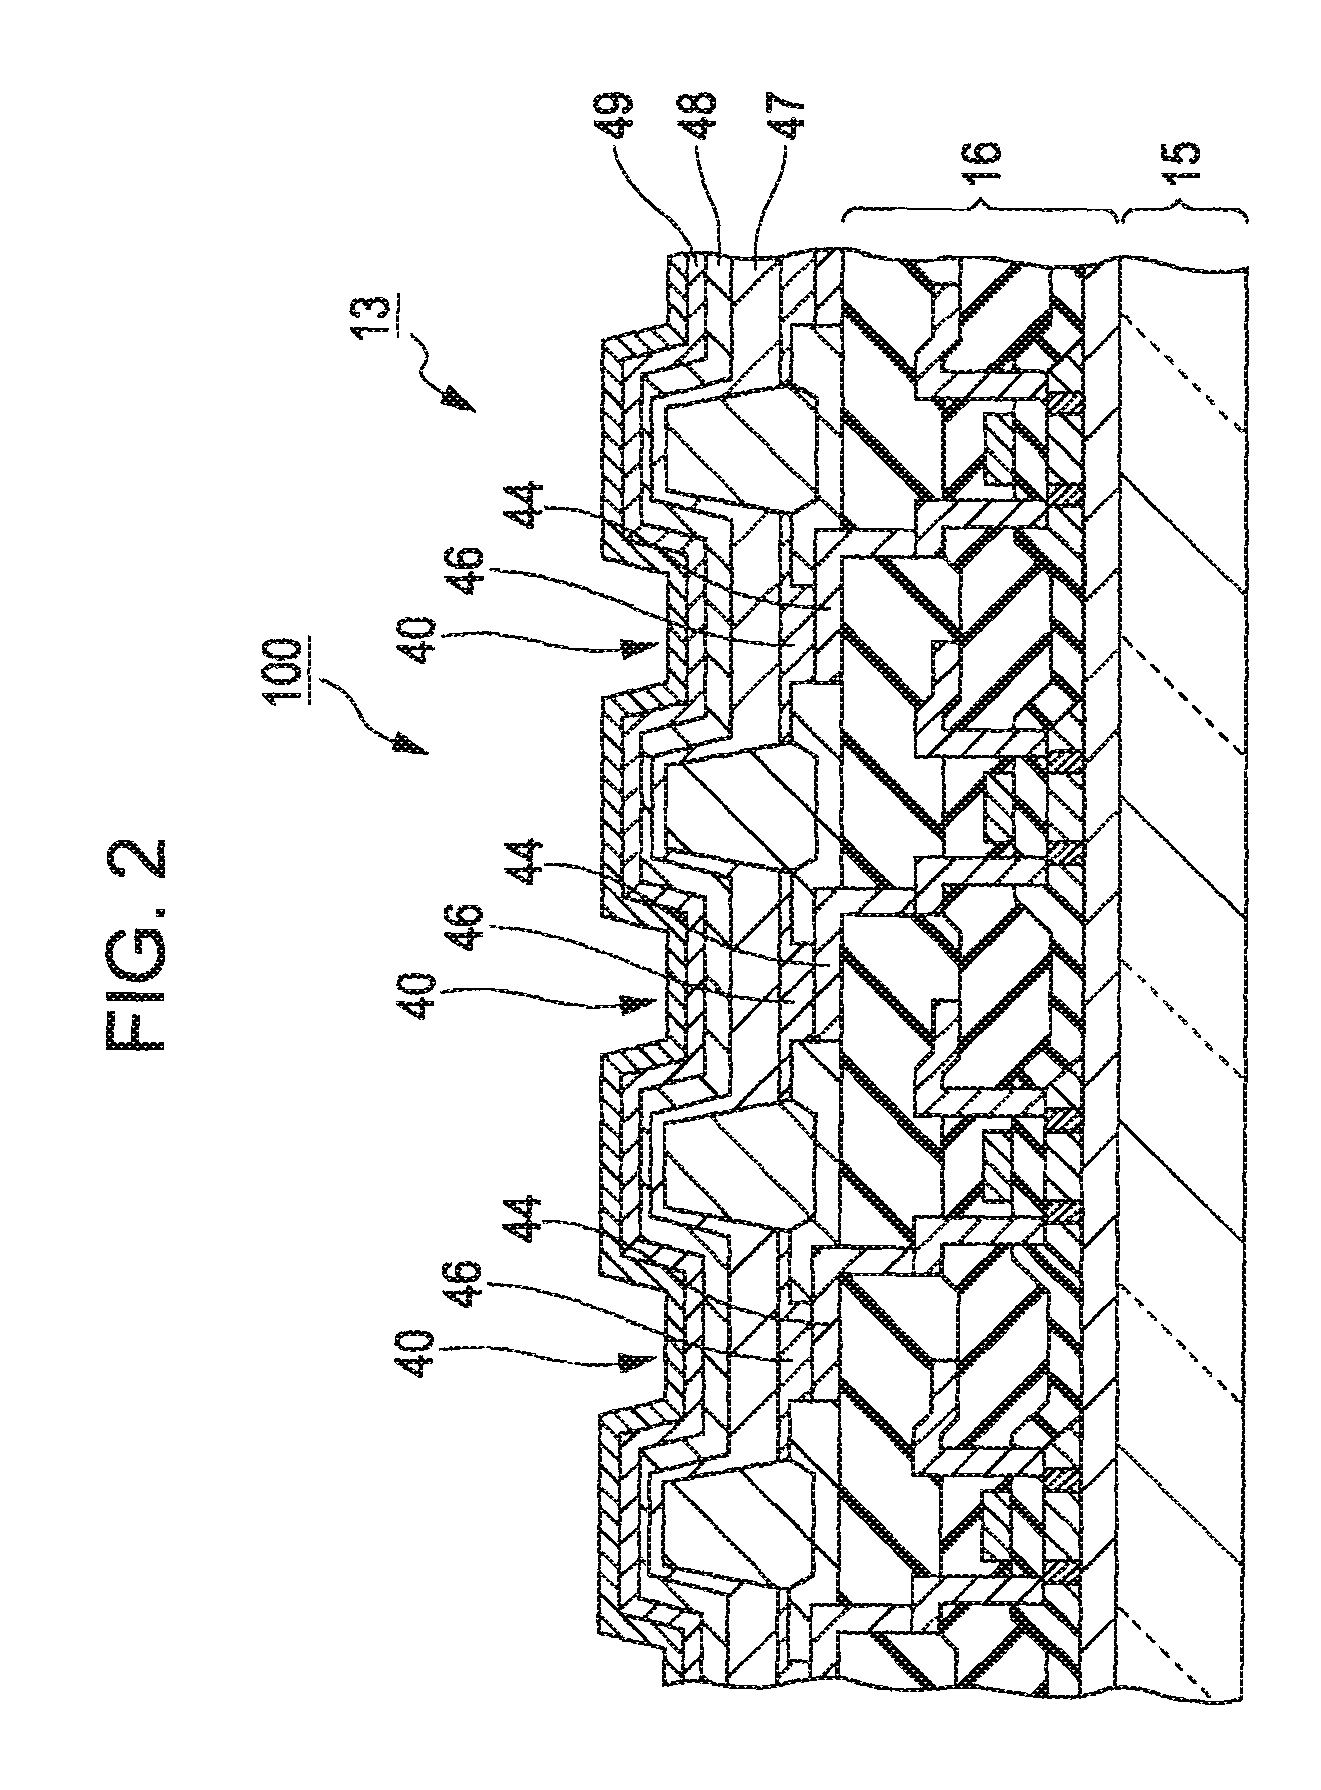 Semiconductor device and electro-optical device